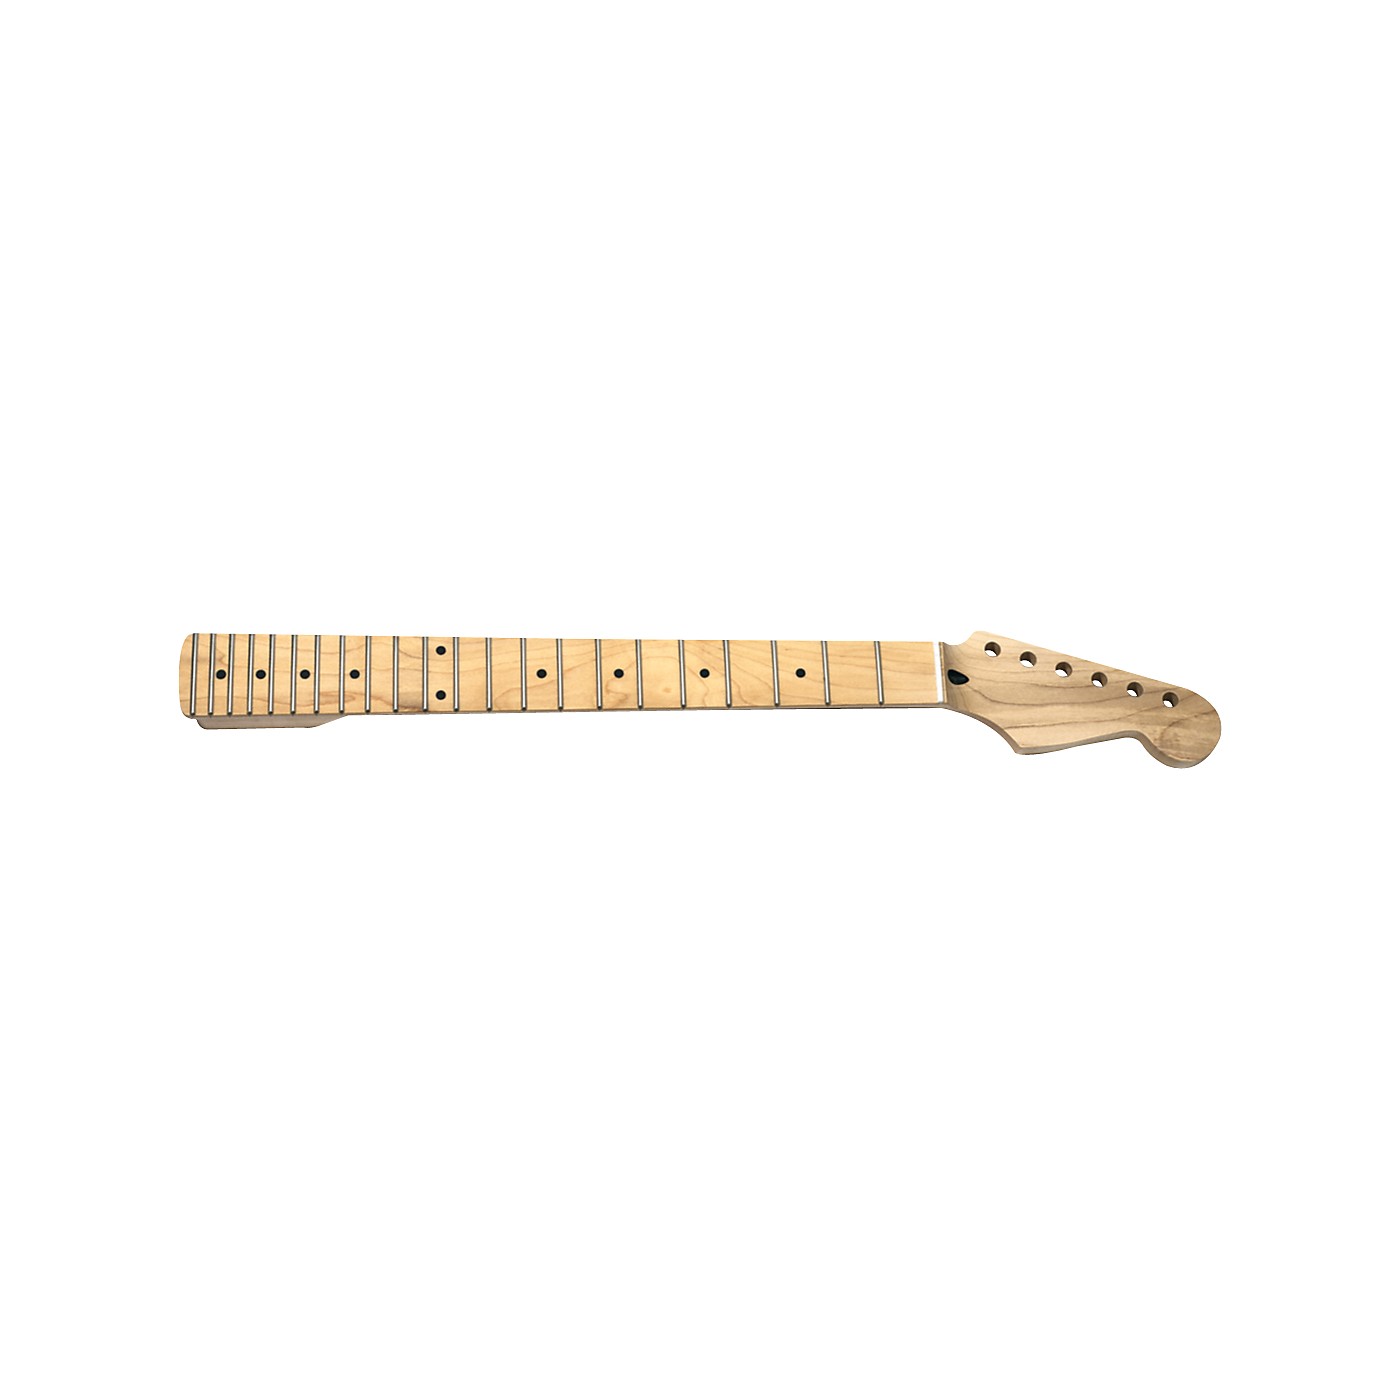 Mighty Mite MM2928 Stratocaster Replacement Neck with Maple Fingerboard and Jumbo Frets thumbnail